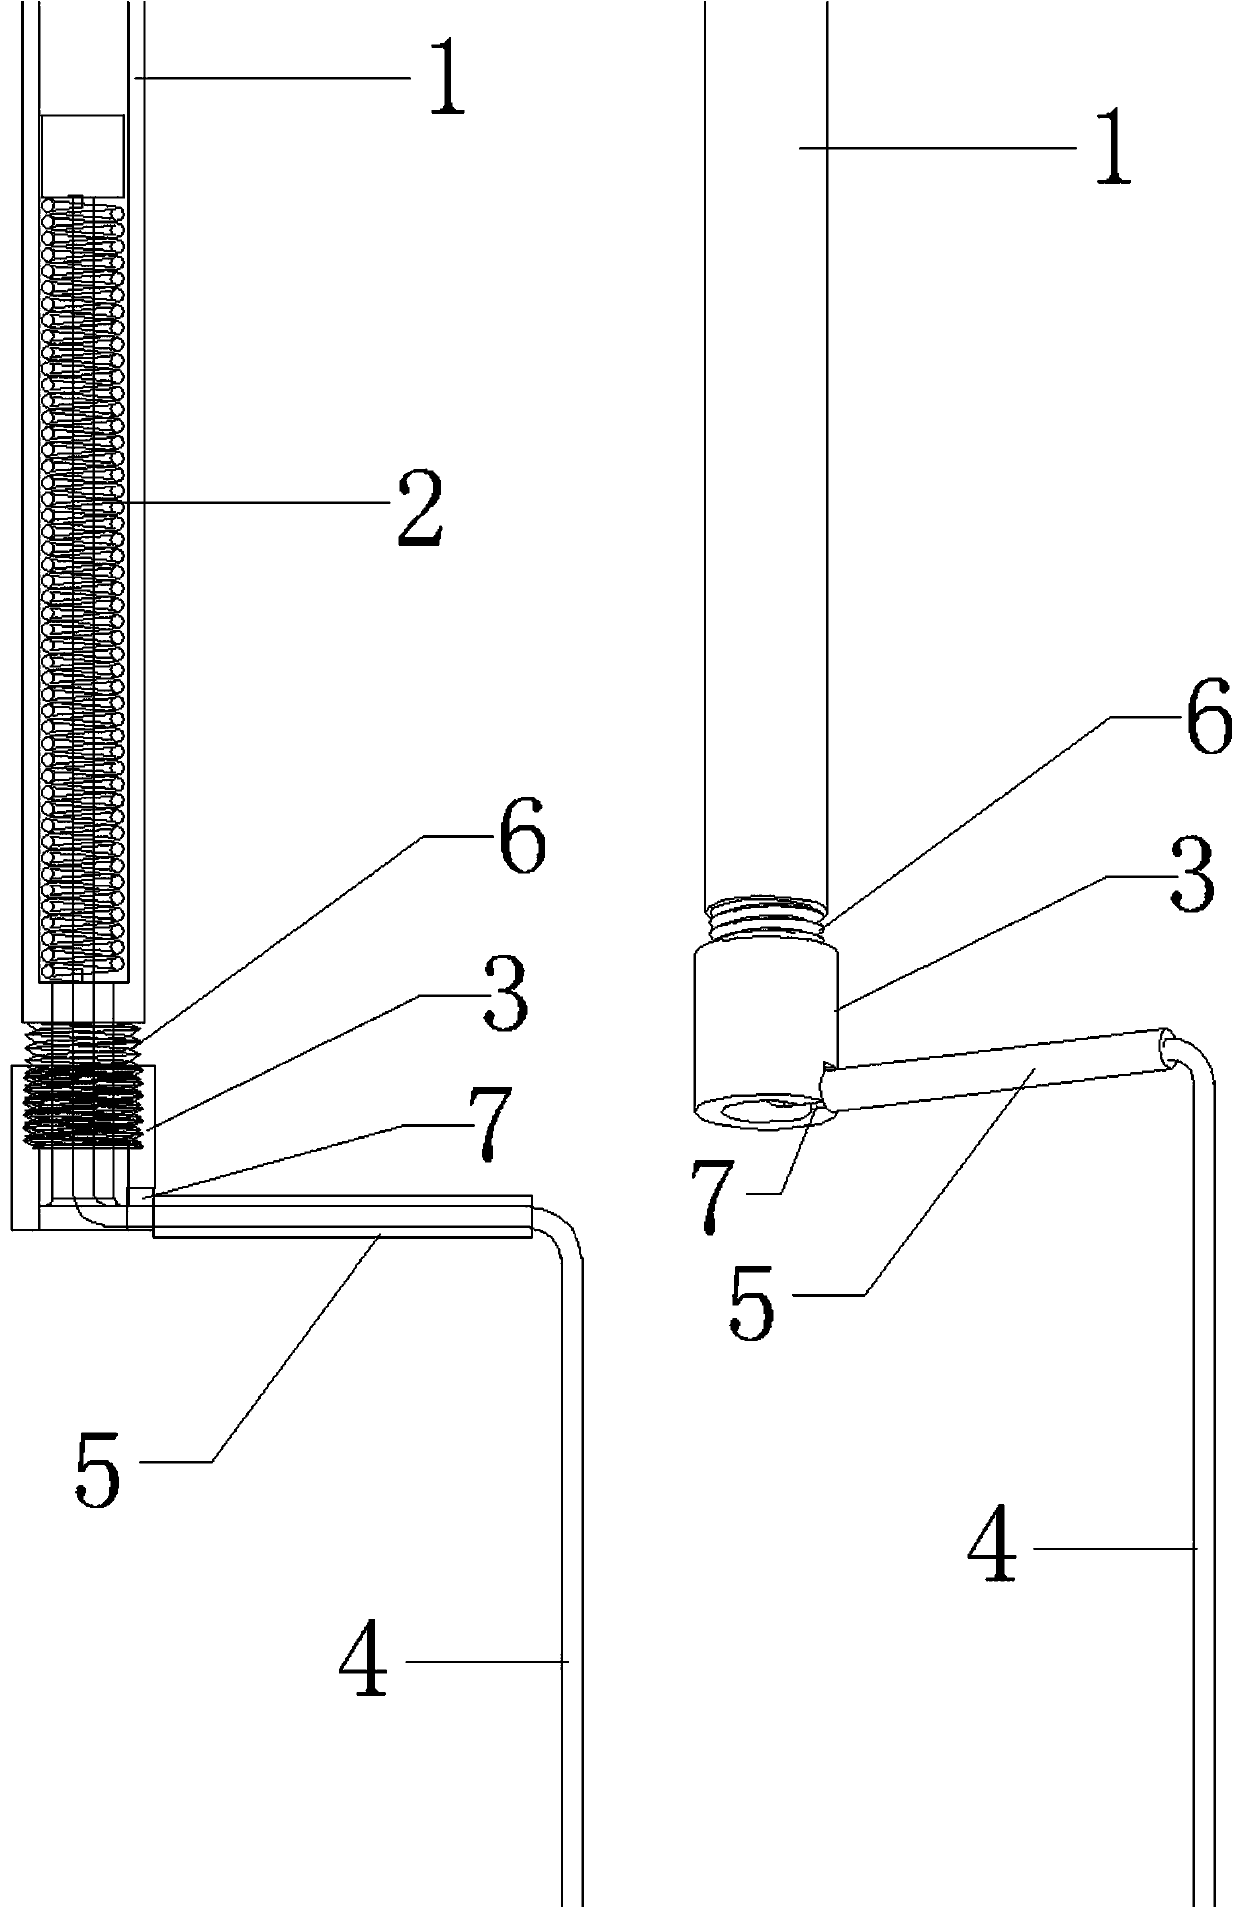 Automatic hook lifter with optionally adjustable sensitivity